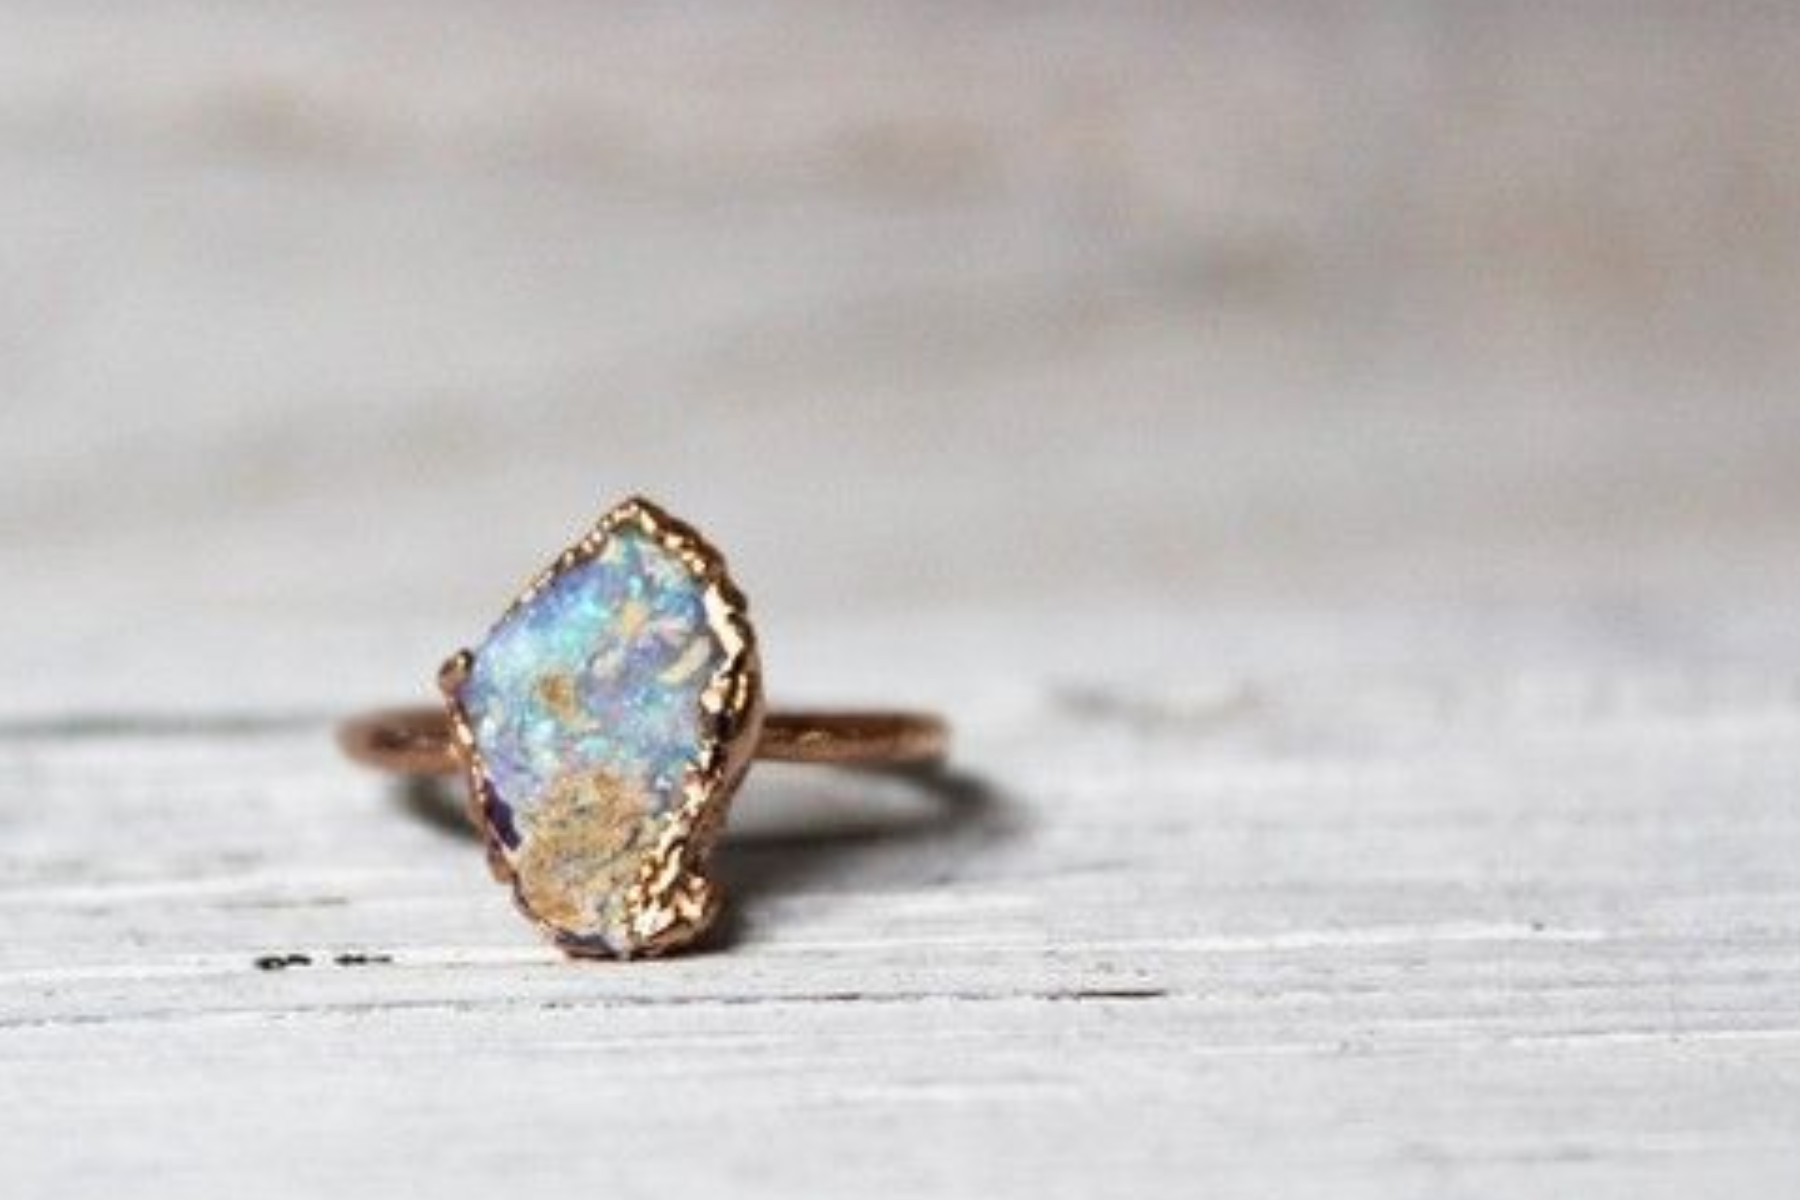 Raw Opal Engagement Ring - The Perfect Combination Of Elegance And Natural Beauty